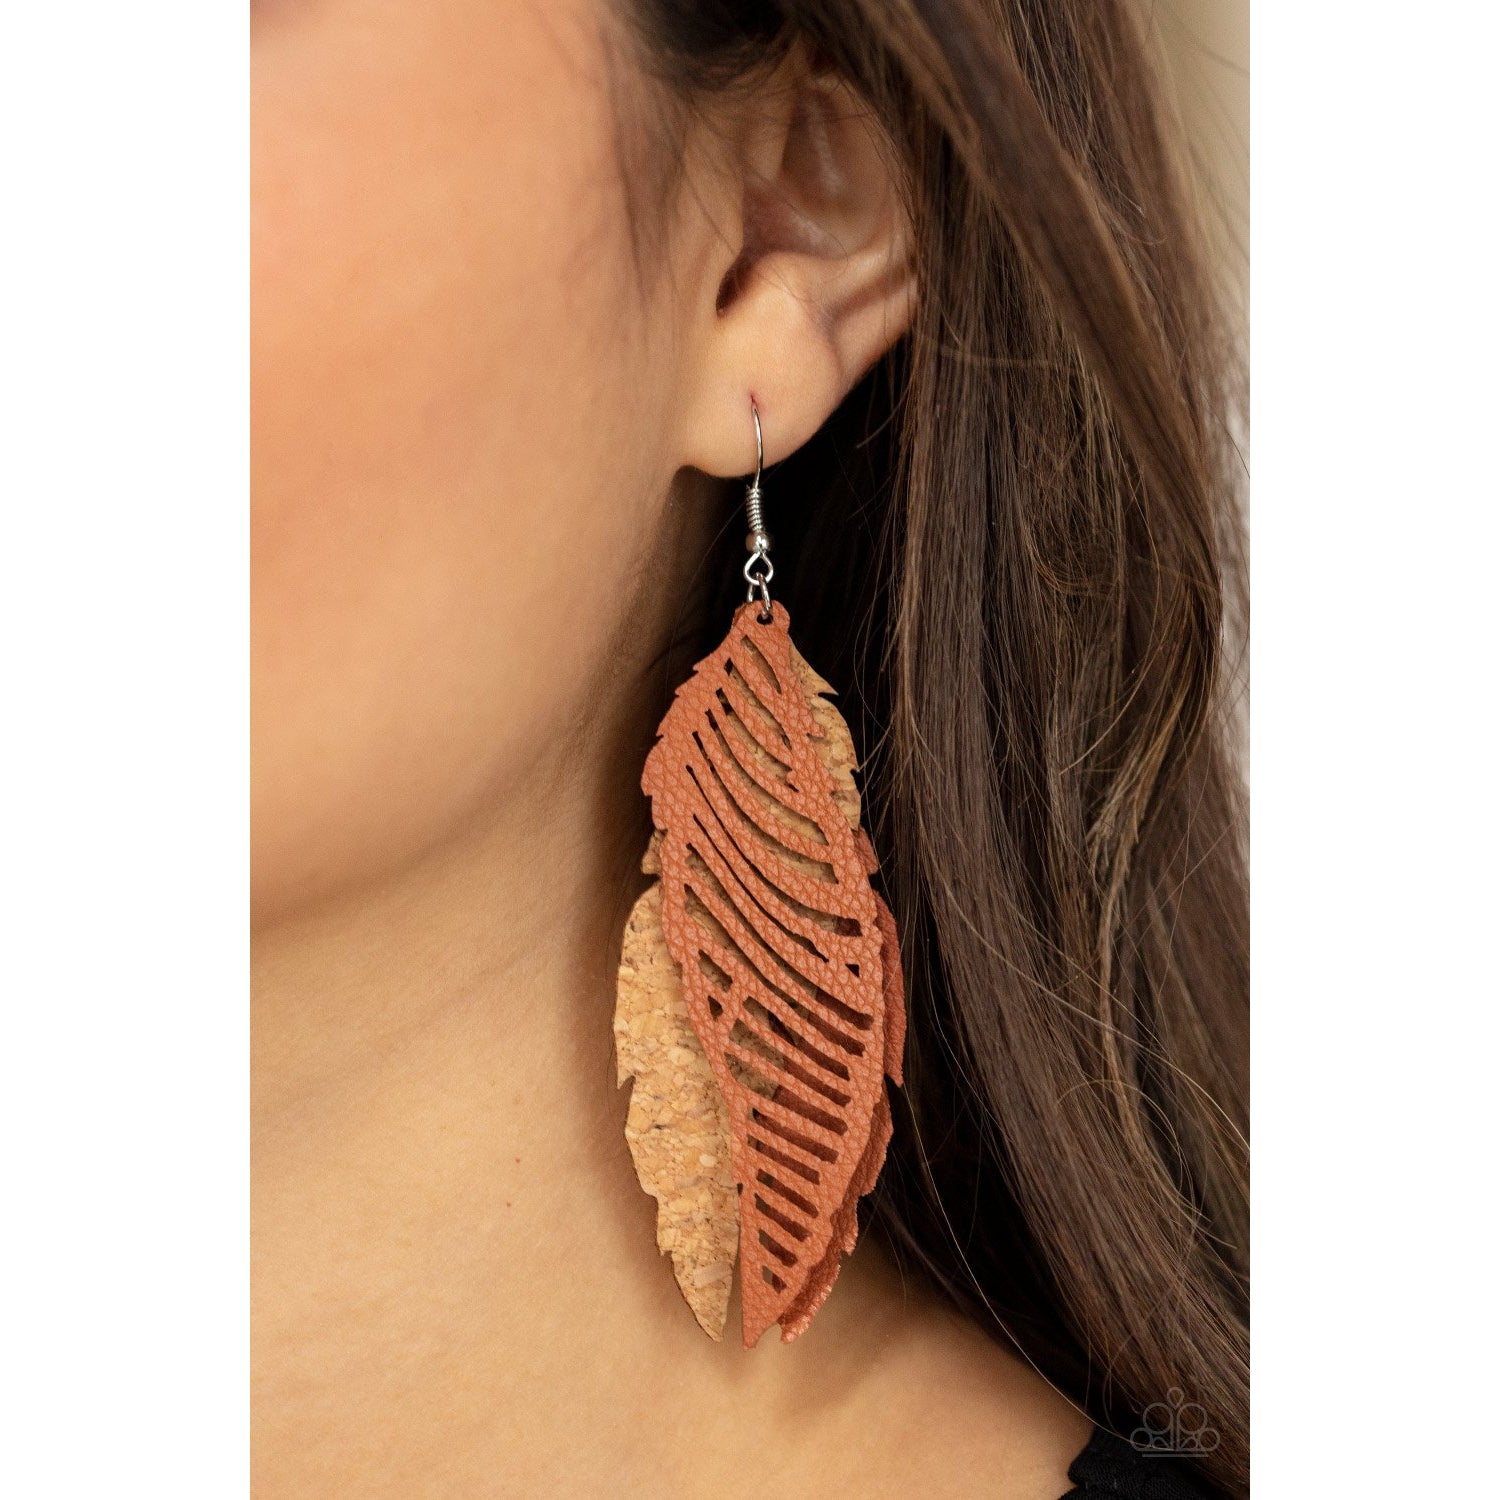 WINGING Off The Hook - Brown Leather Feather Earrings - Paparazzi Accessories - GlaMarous Titi Jewels